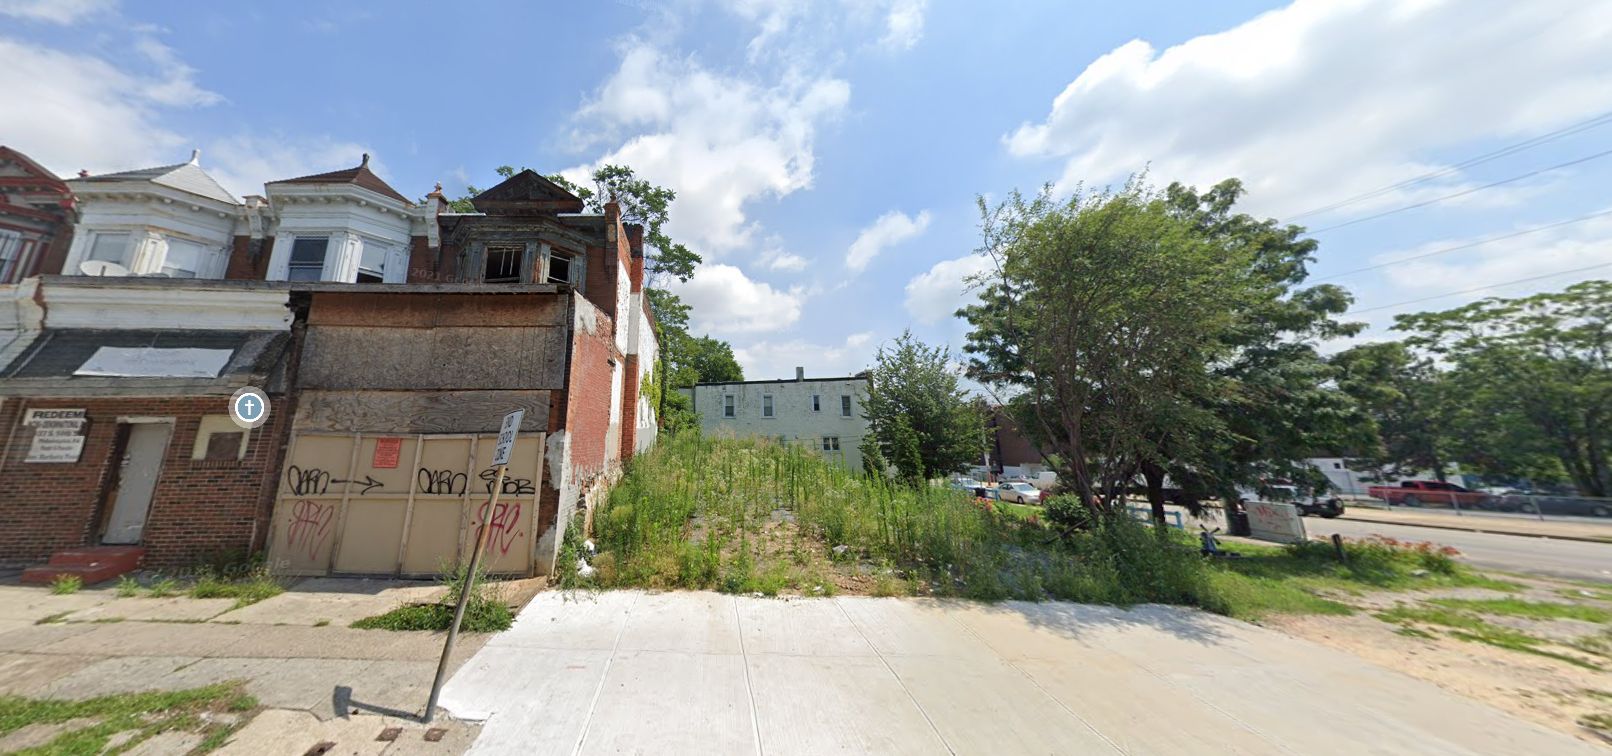 1437 South 58th Street. Site conditions prior to redevelopment. Looking northeast. July 2021. Credit: Google Maps